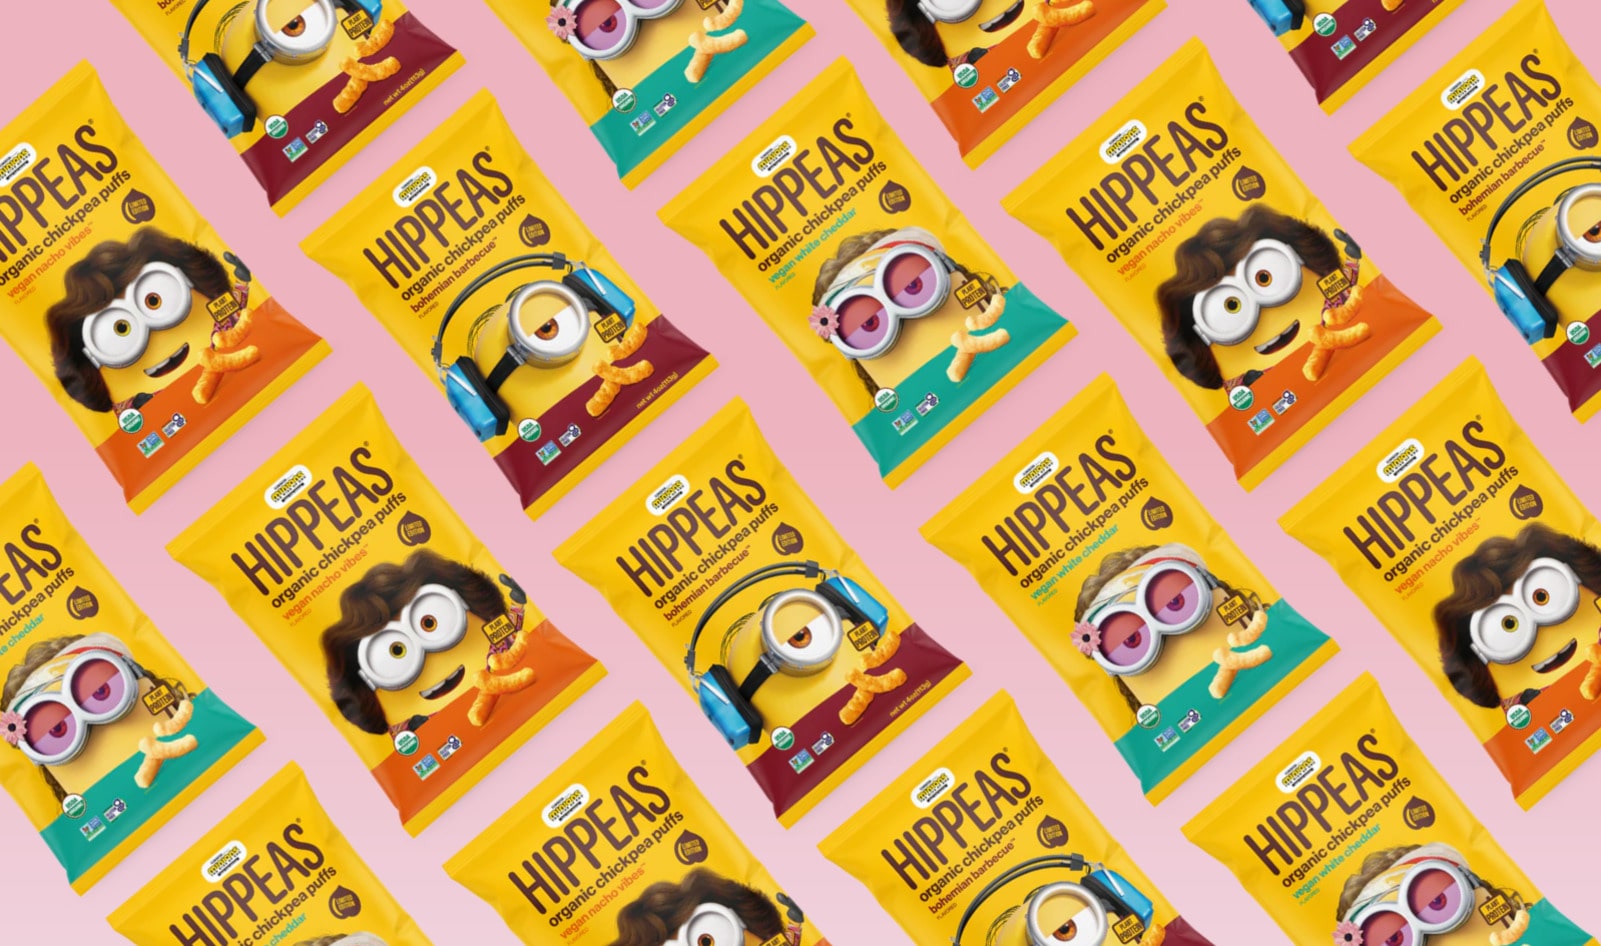 Vegan Snack of the Week: Minions HIPPEAS Chickpea Puffs